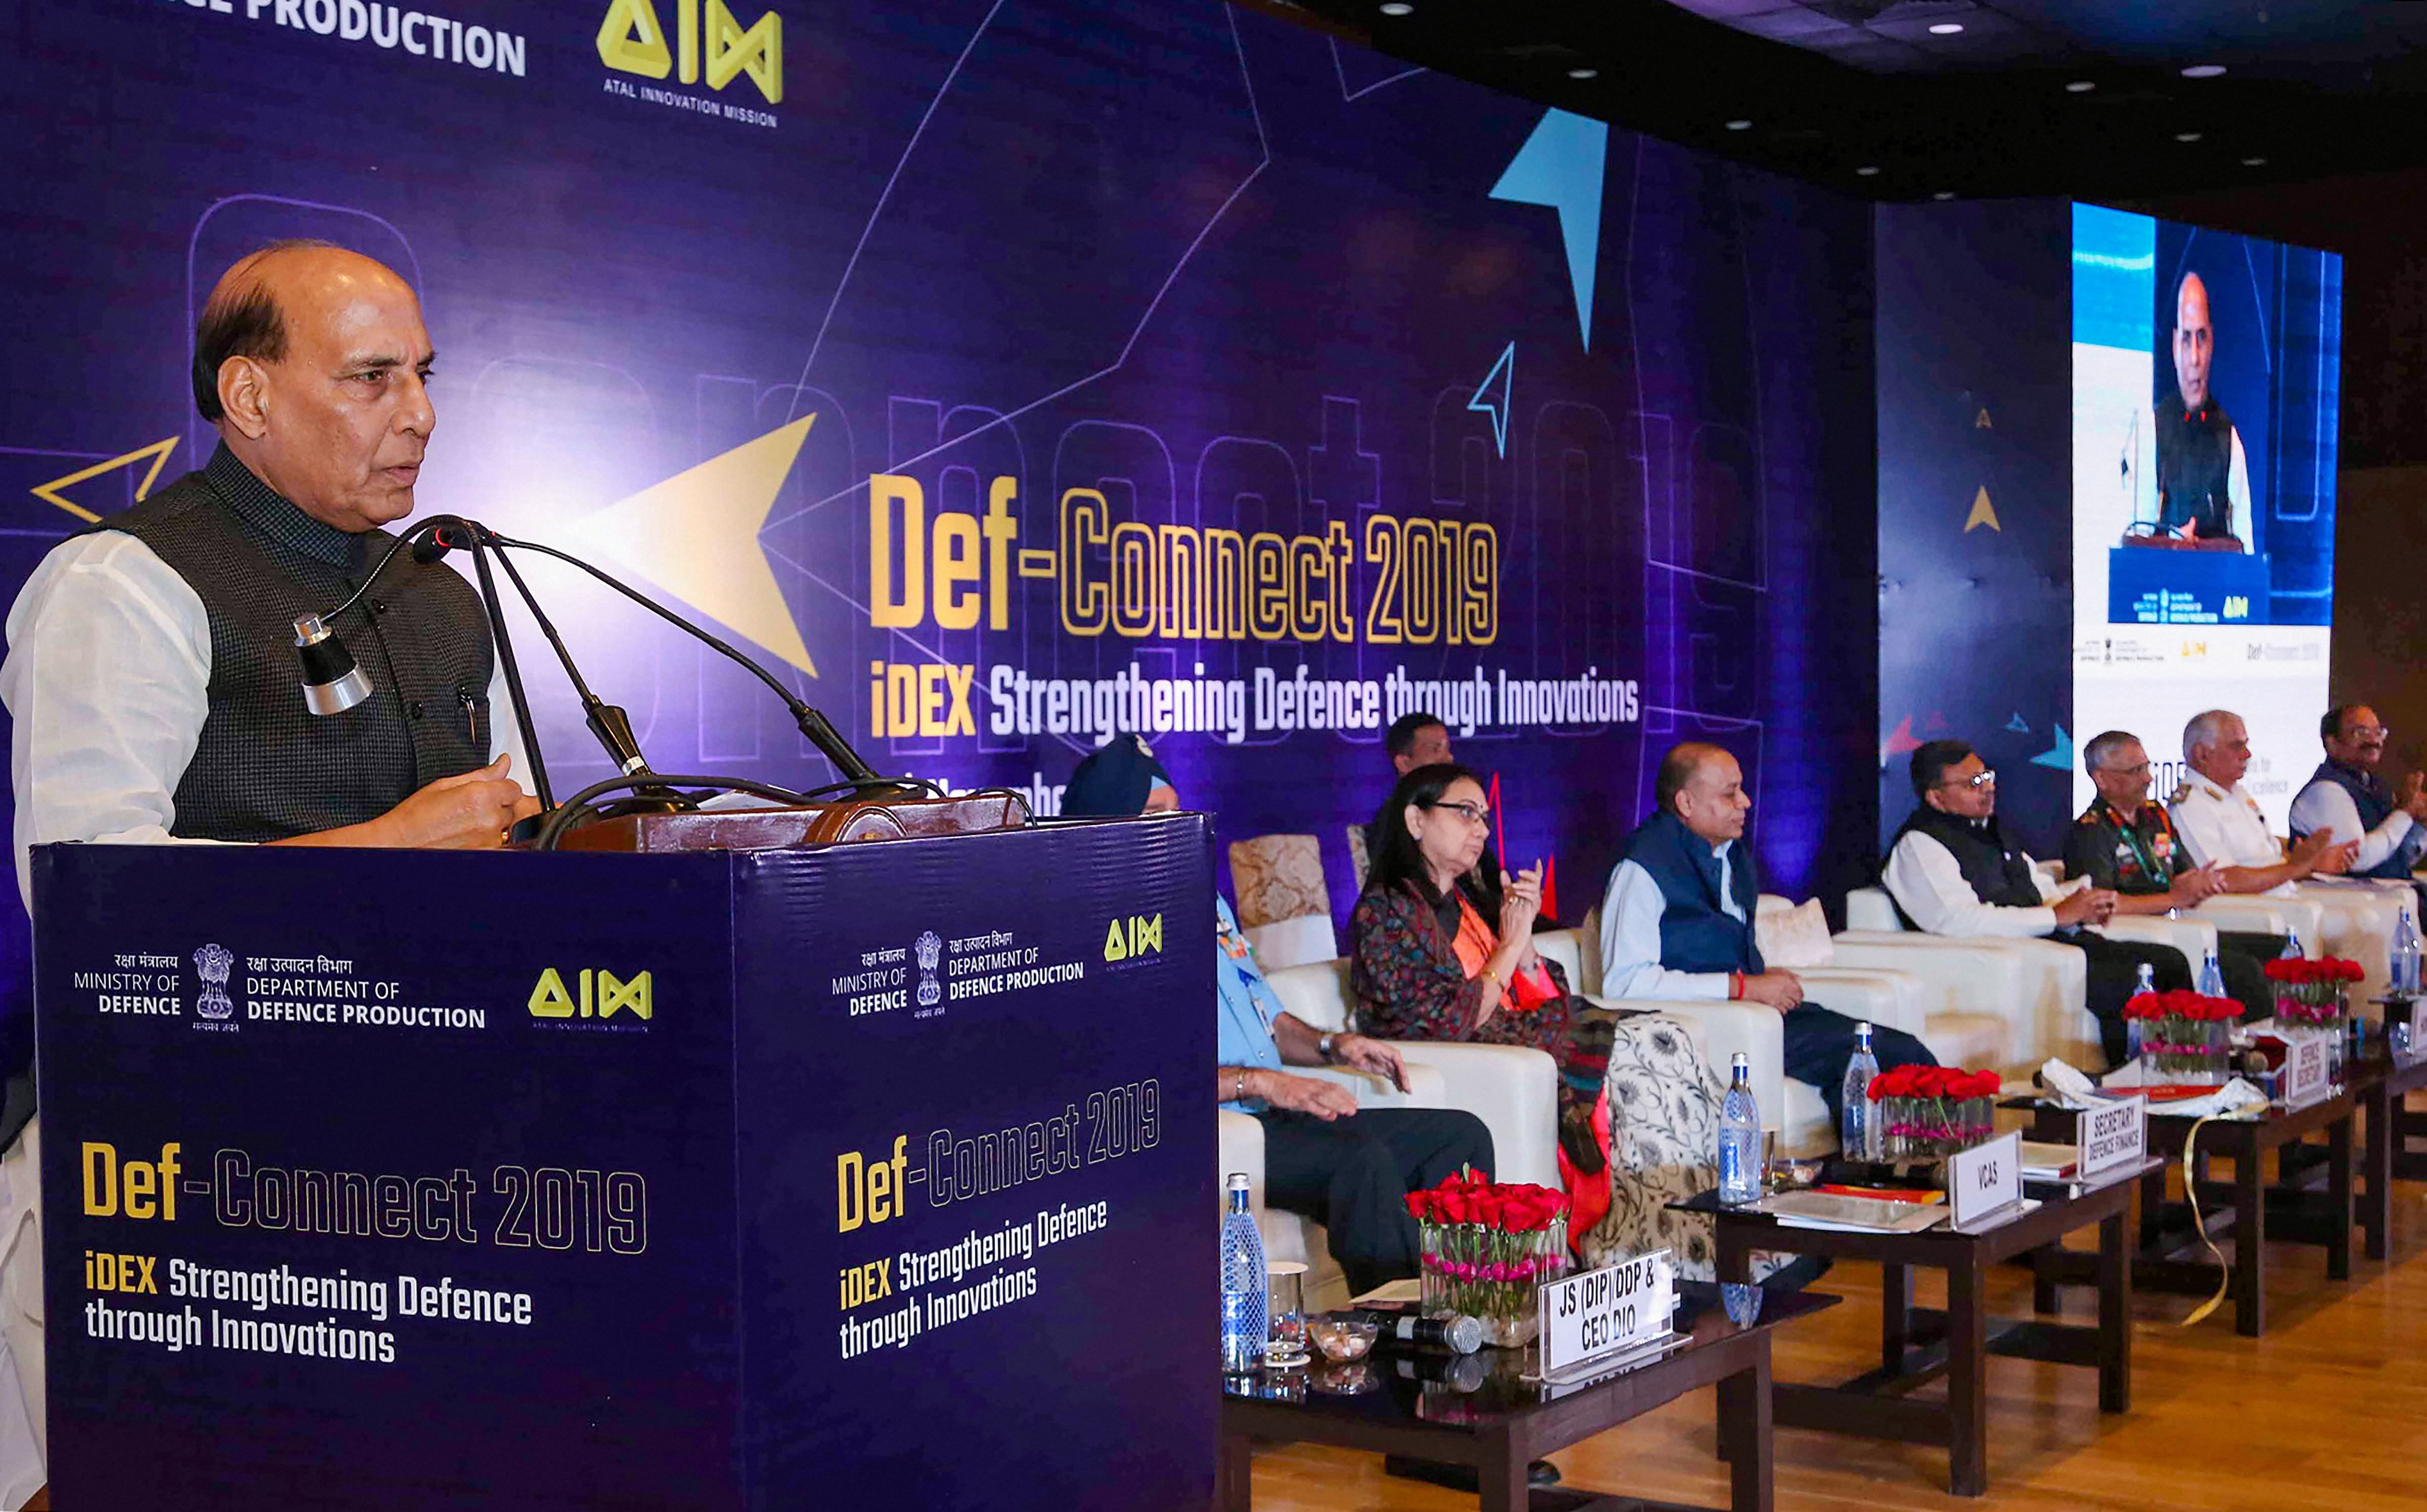 Union Minister for Defence Rajnath Singh addresses the ‘Def-Connect 2019’ under the aegis of Innovations for Defence Excellence (iDEX), in New Delhi. (PTI Photo)